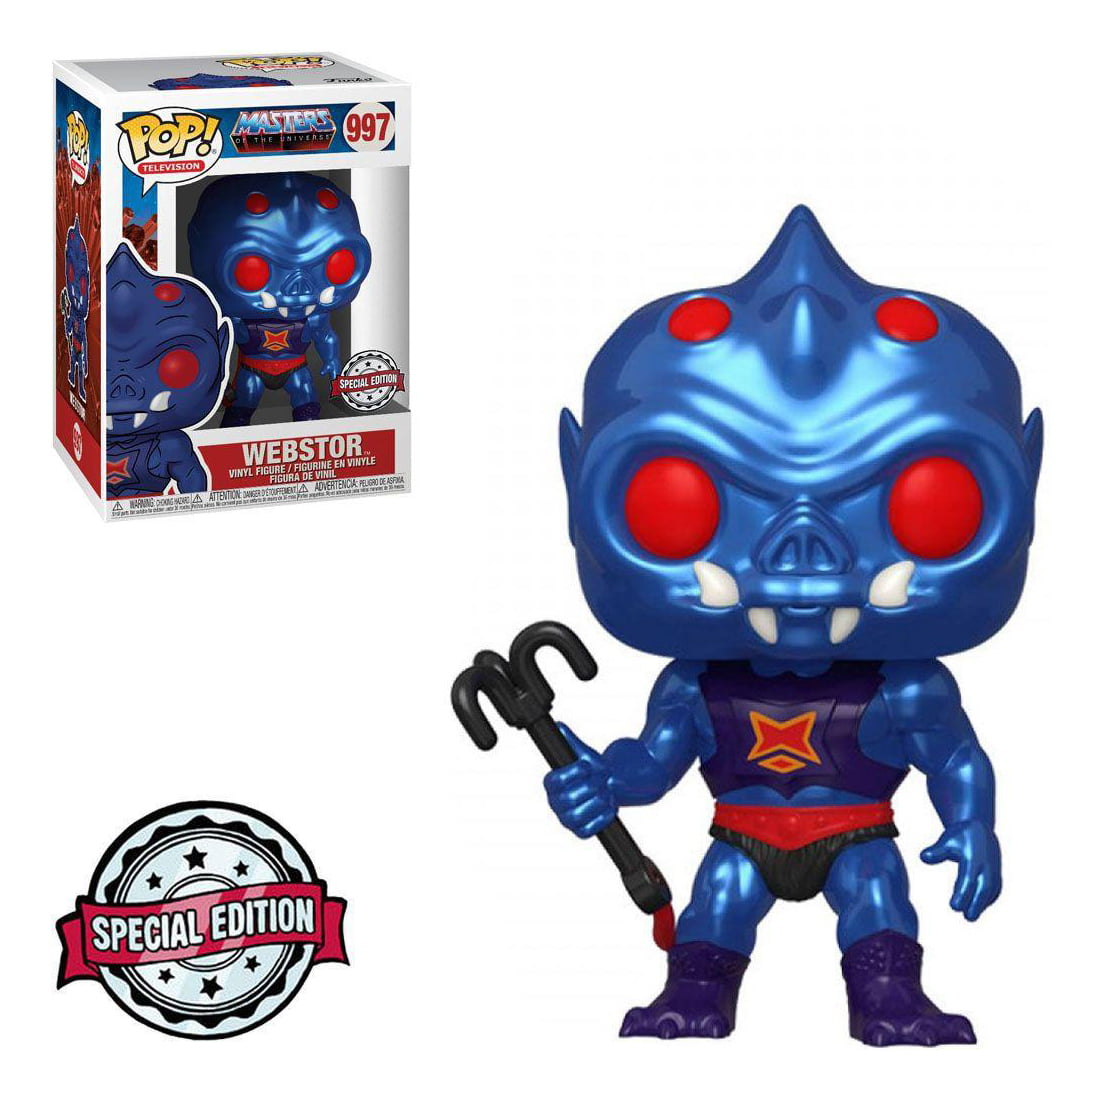 POP! FUNKO - MASTER OF THE UNIVERSE - WEBSTOR - SPECIAL EDITION